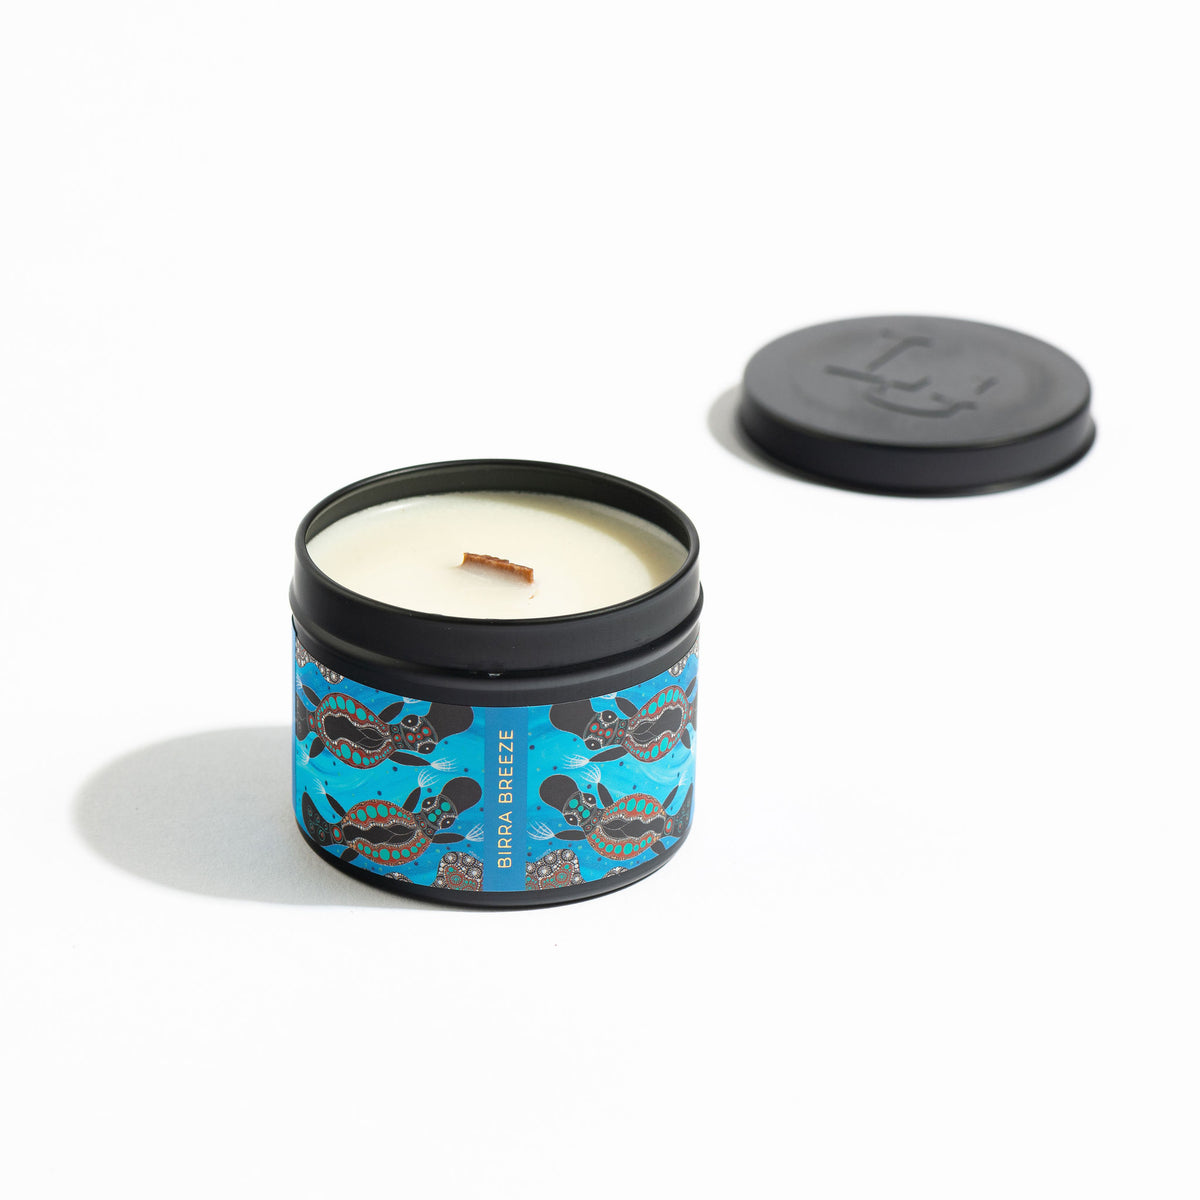 Soul Australiana Travel Candle Trio Gift Set- Tidal Pool Driftings | Luxury Candles &amp; Home Fragrances by Light + Glo